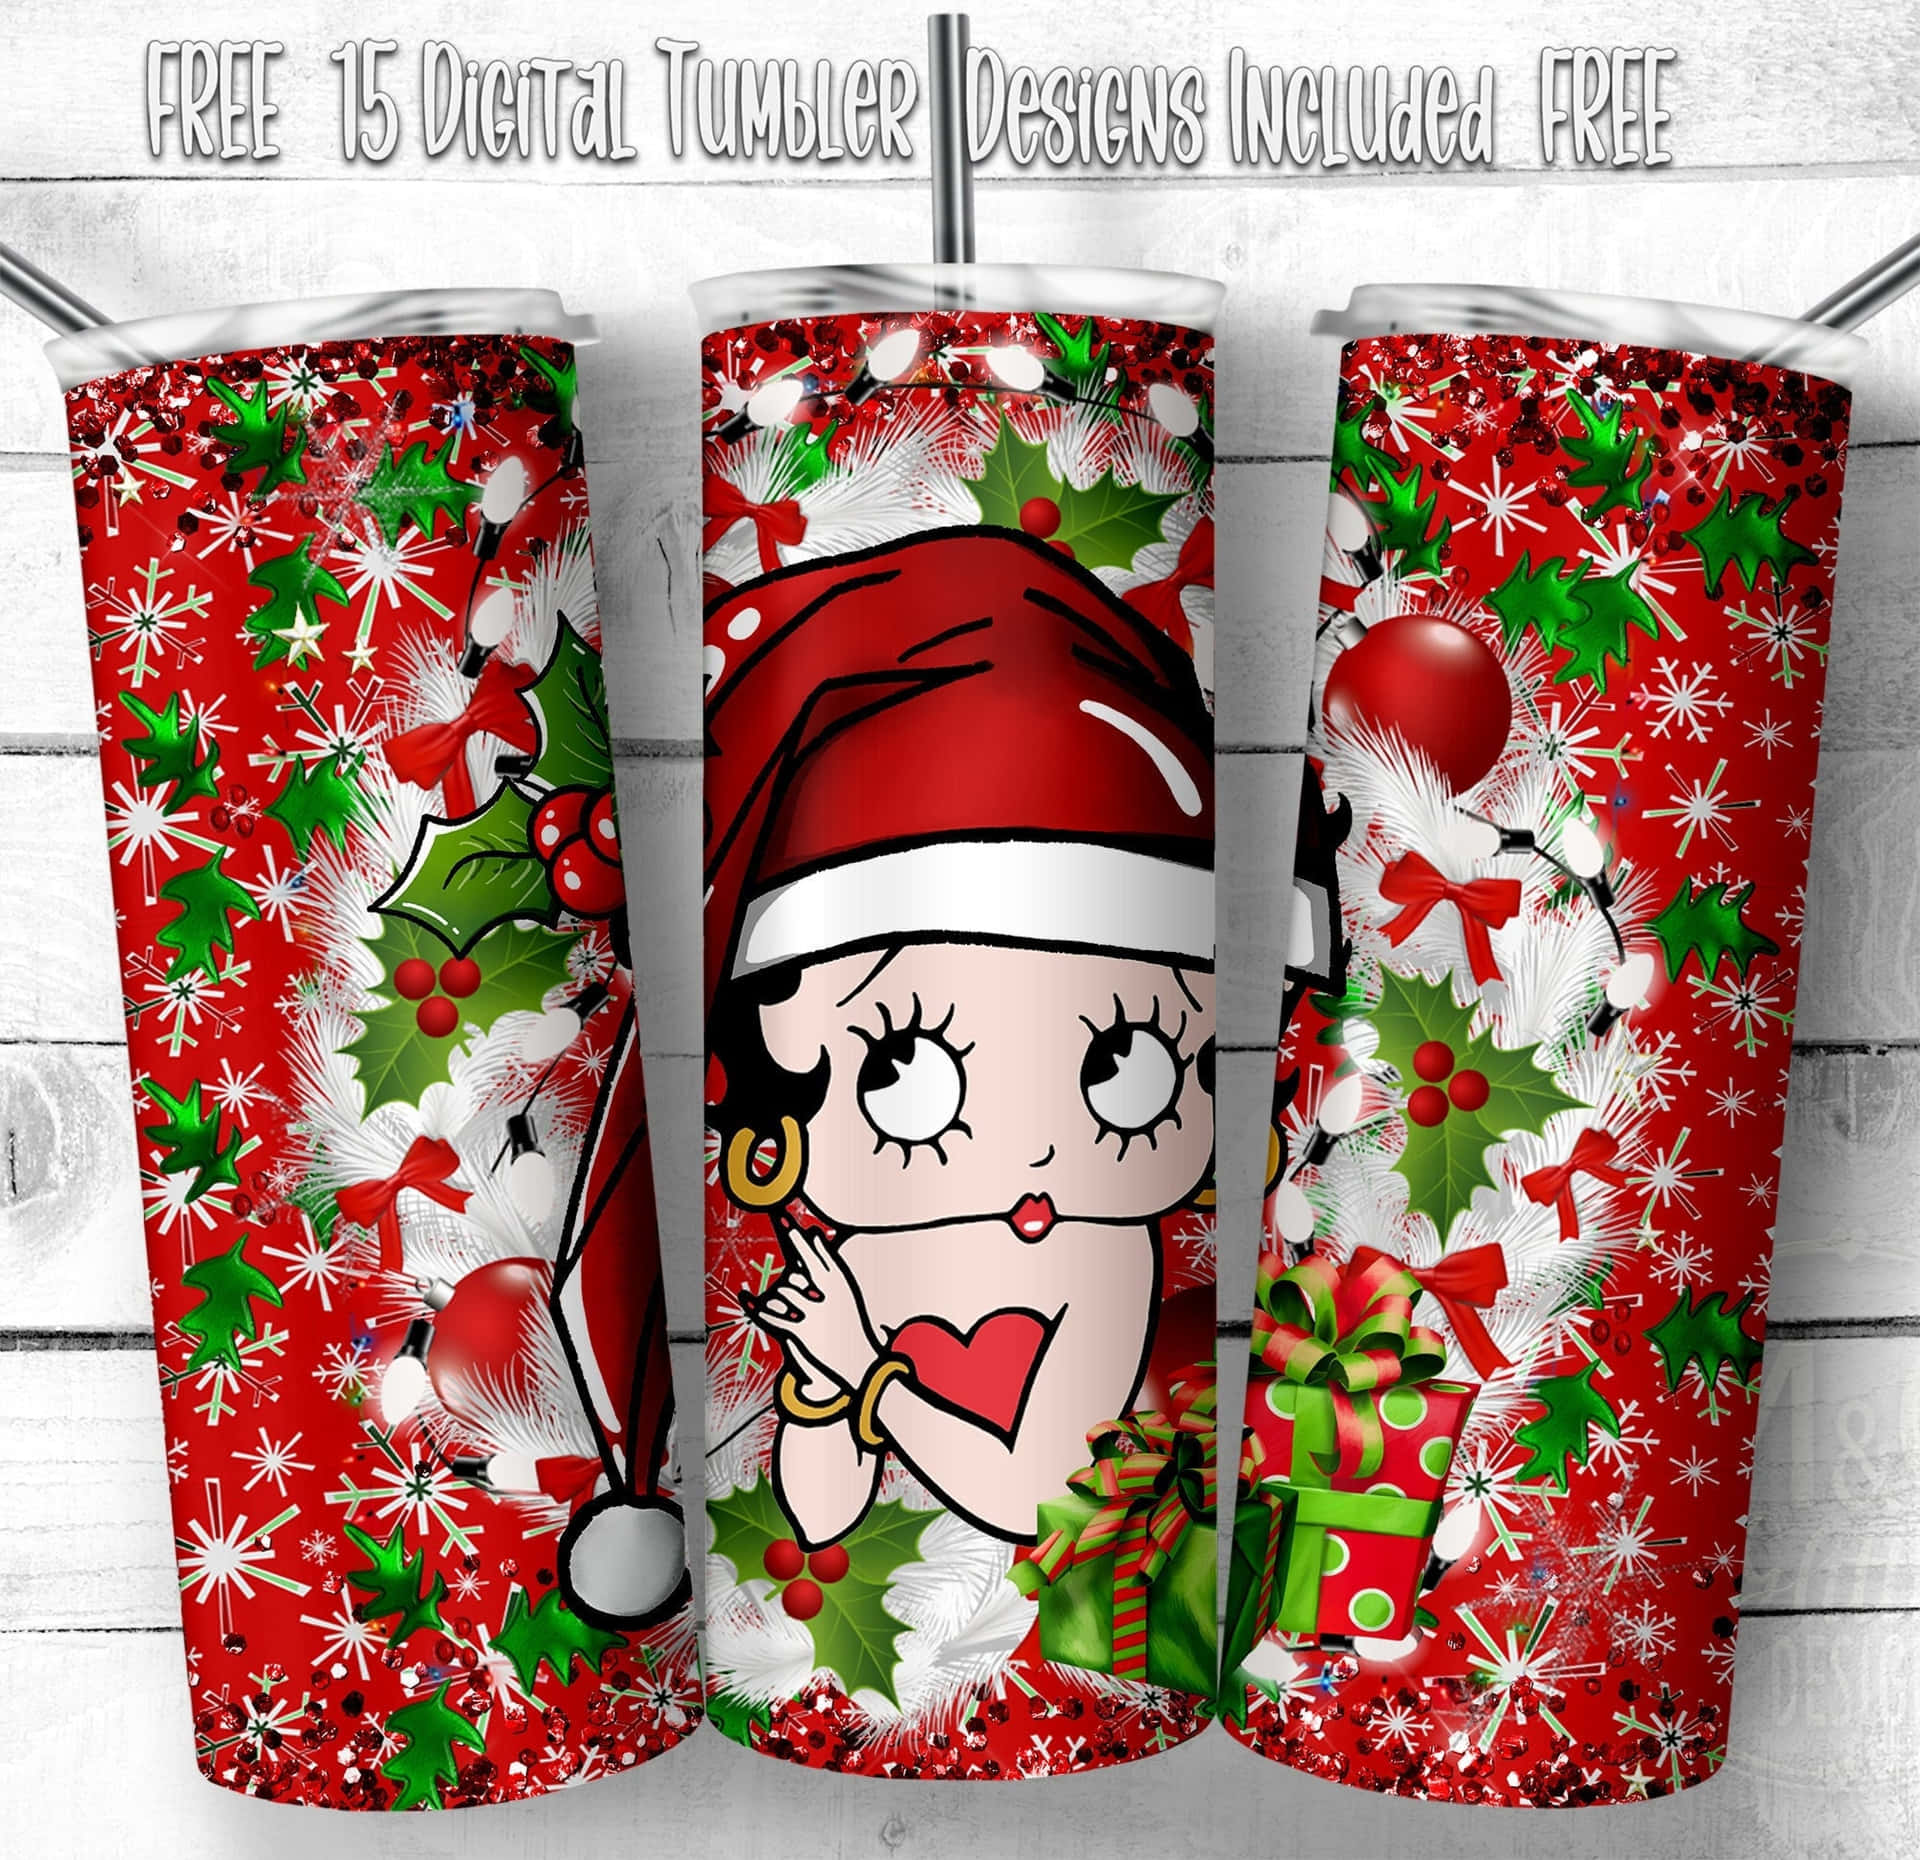 Betty Boop All Dressed Up For Christmas Wallpaper